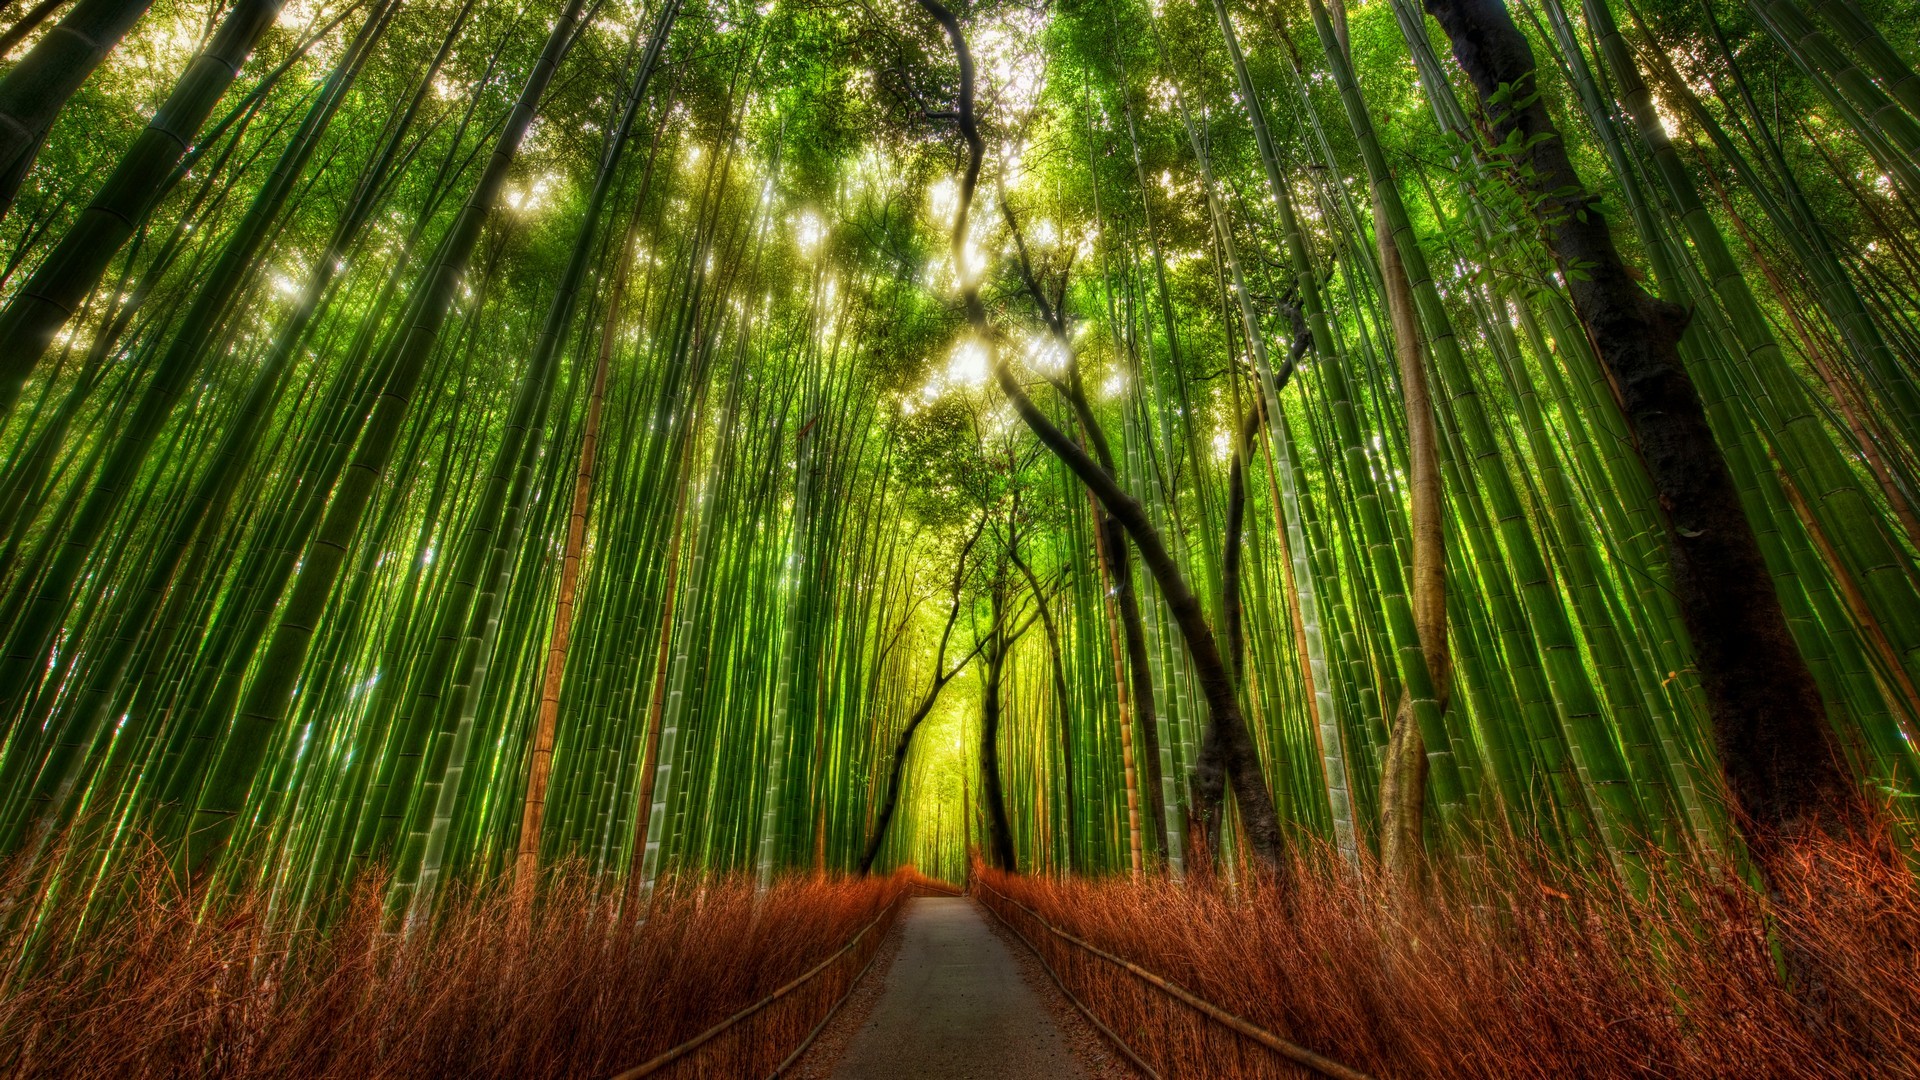 General 1920x1080 bamboo forest HDR trees plants Kyoto Asia Japan walkway pathway